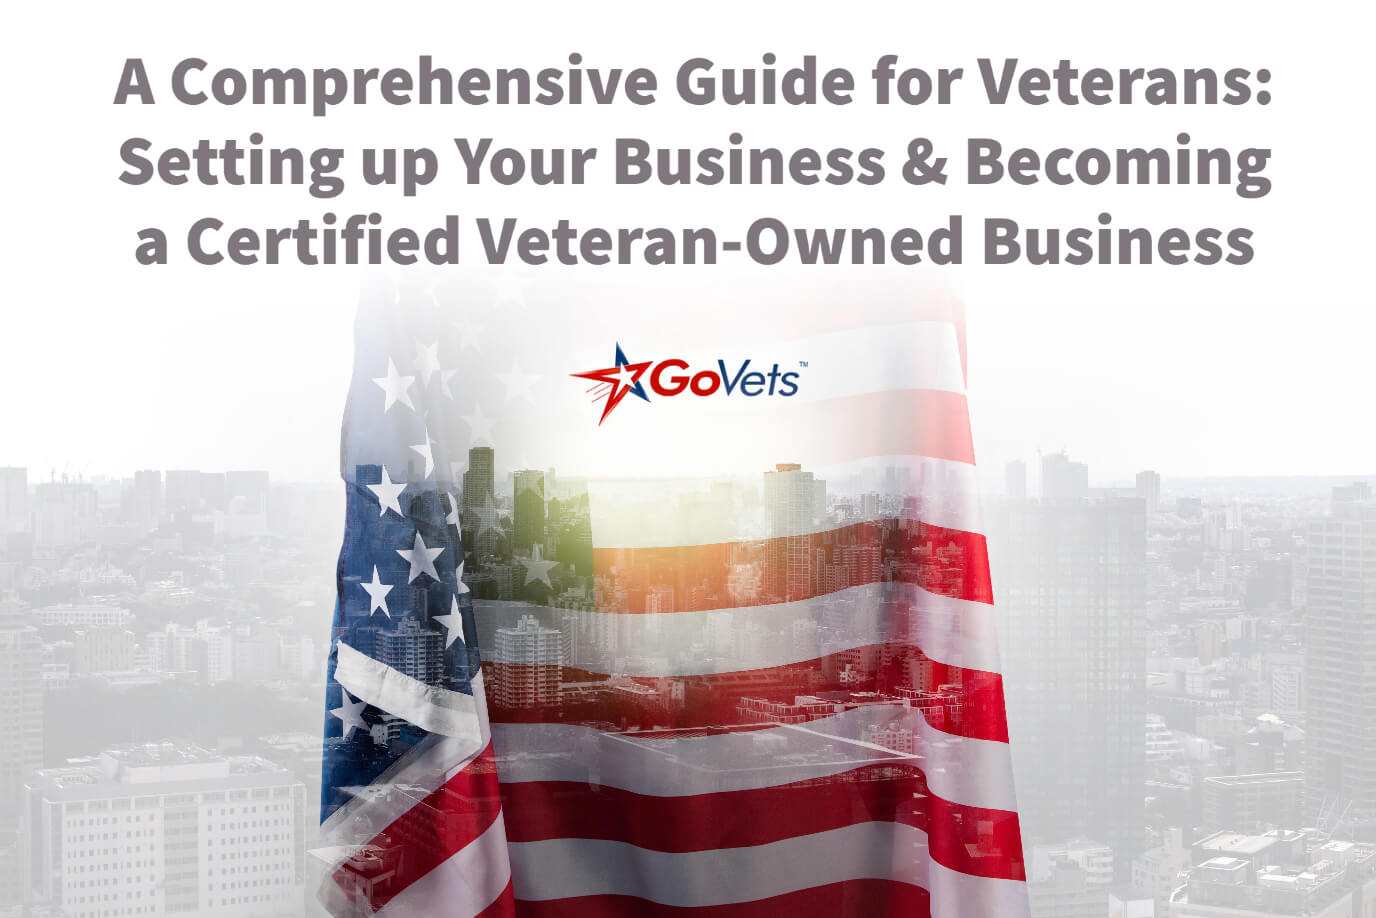 Veteran-Owned Business Certification Guide - Top Organizations & Benefits - Brought to you from GoVets